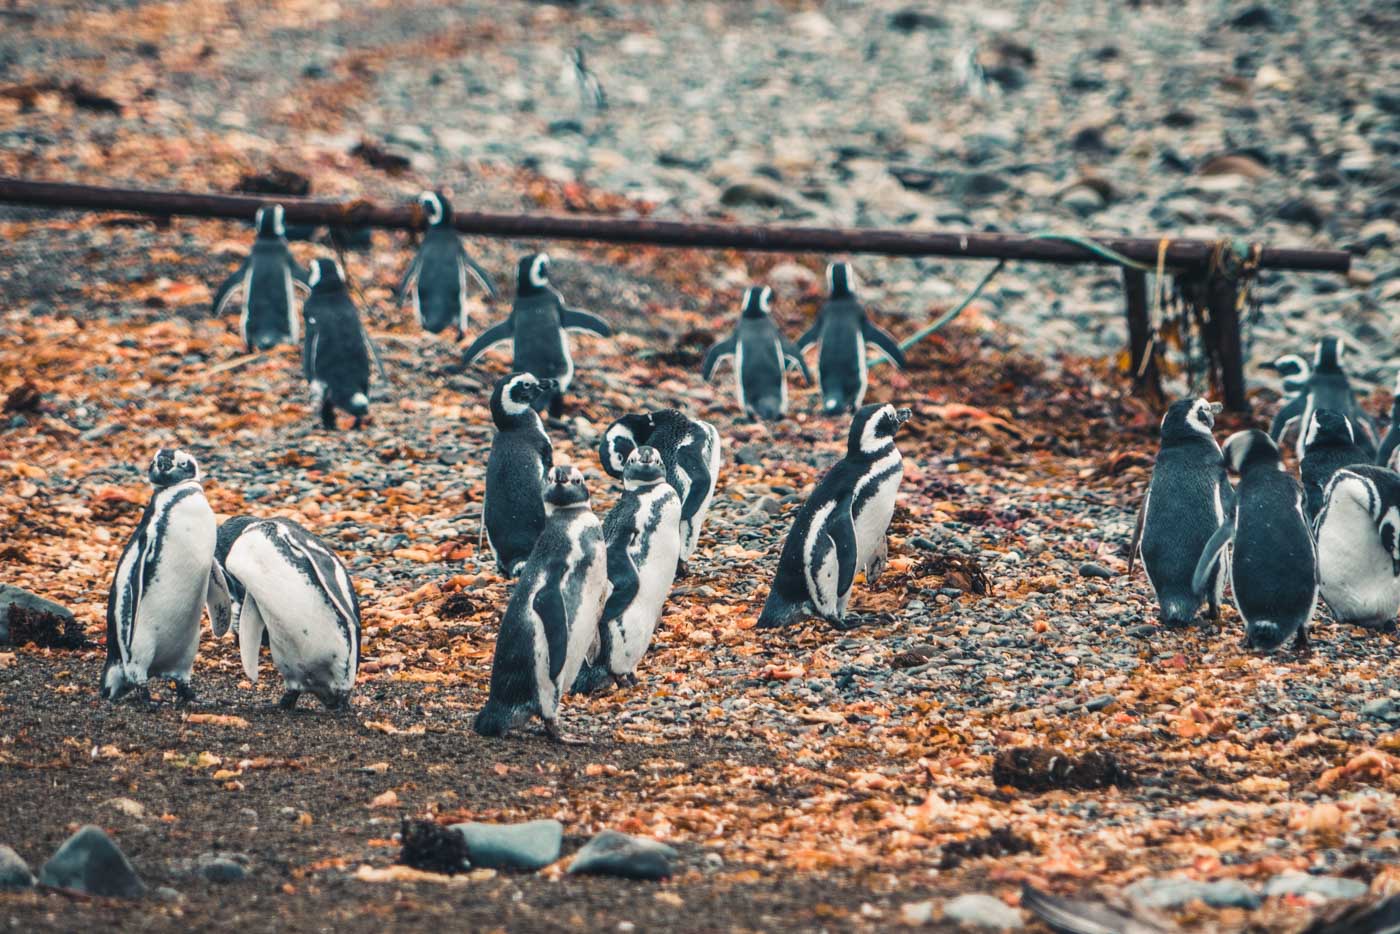 March Of The Penguins And The Roar Of Sea Lions In Punta Arenas, Chile